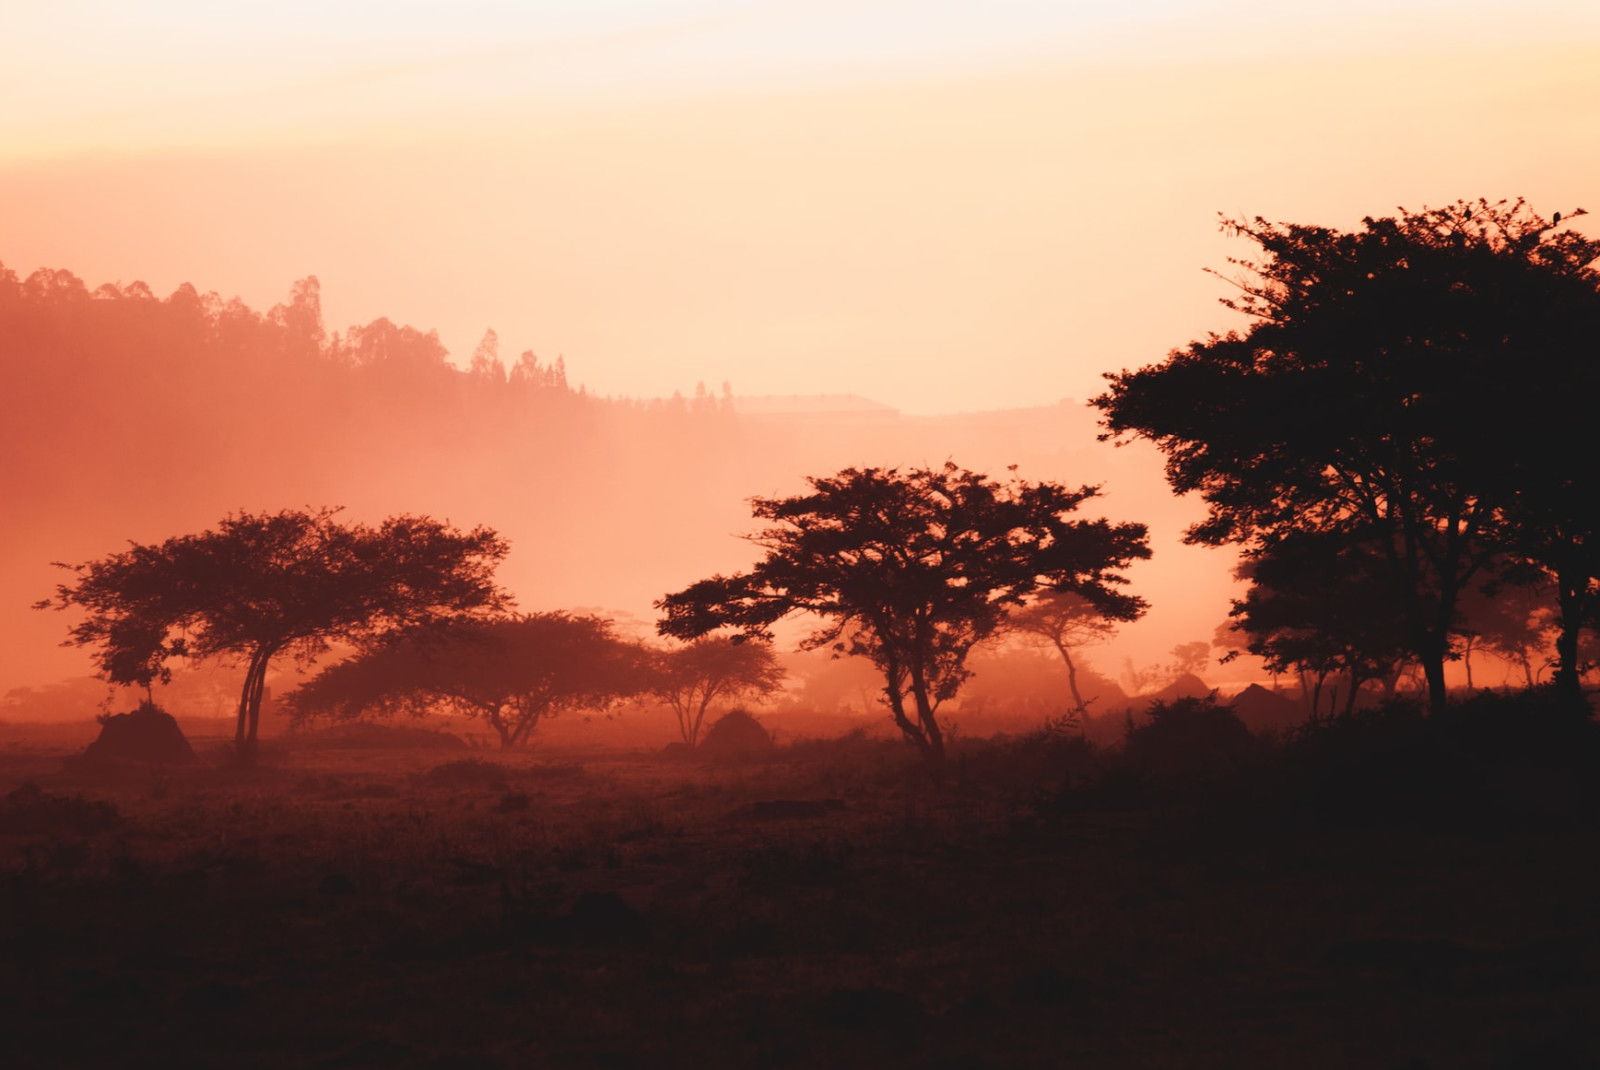 rwanda kigali africa sunset with red tones and trees